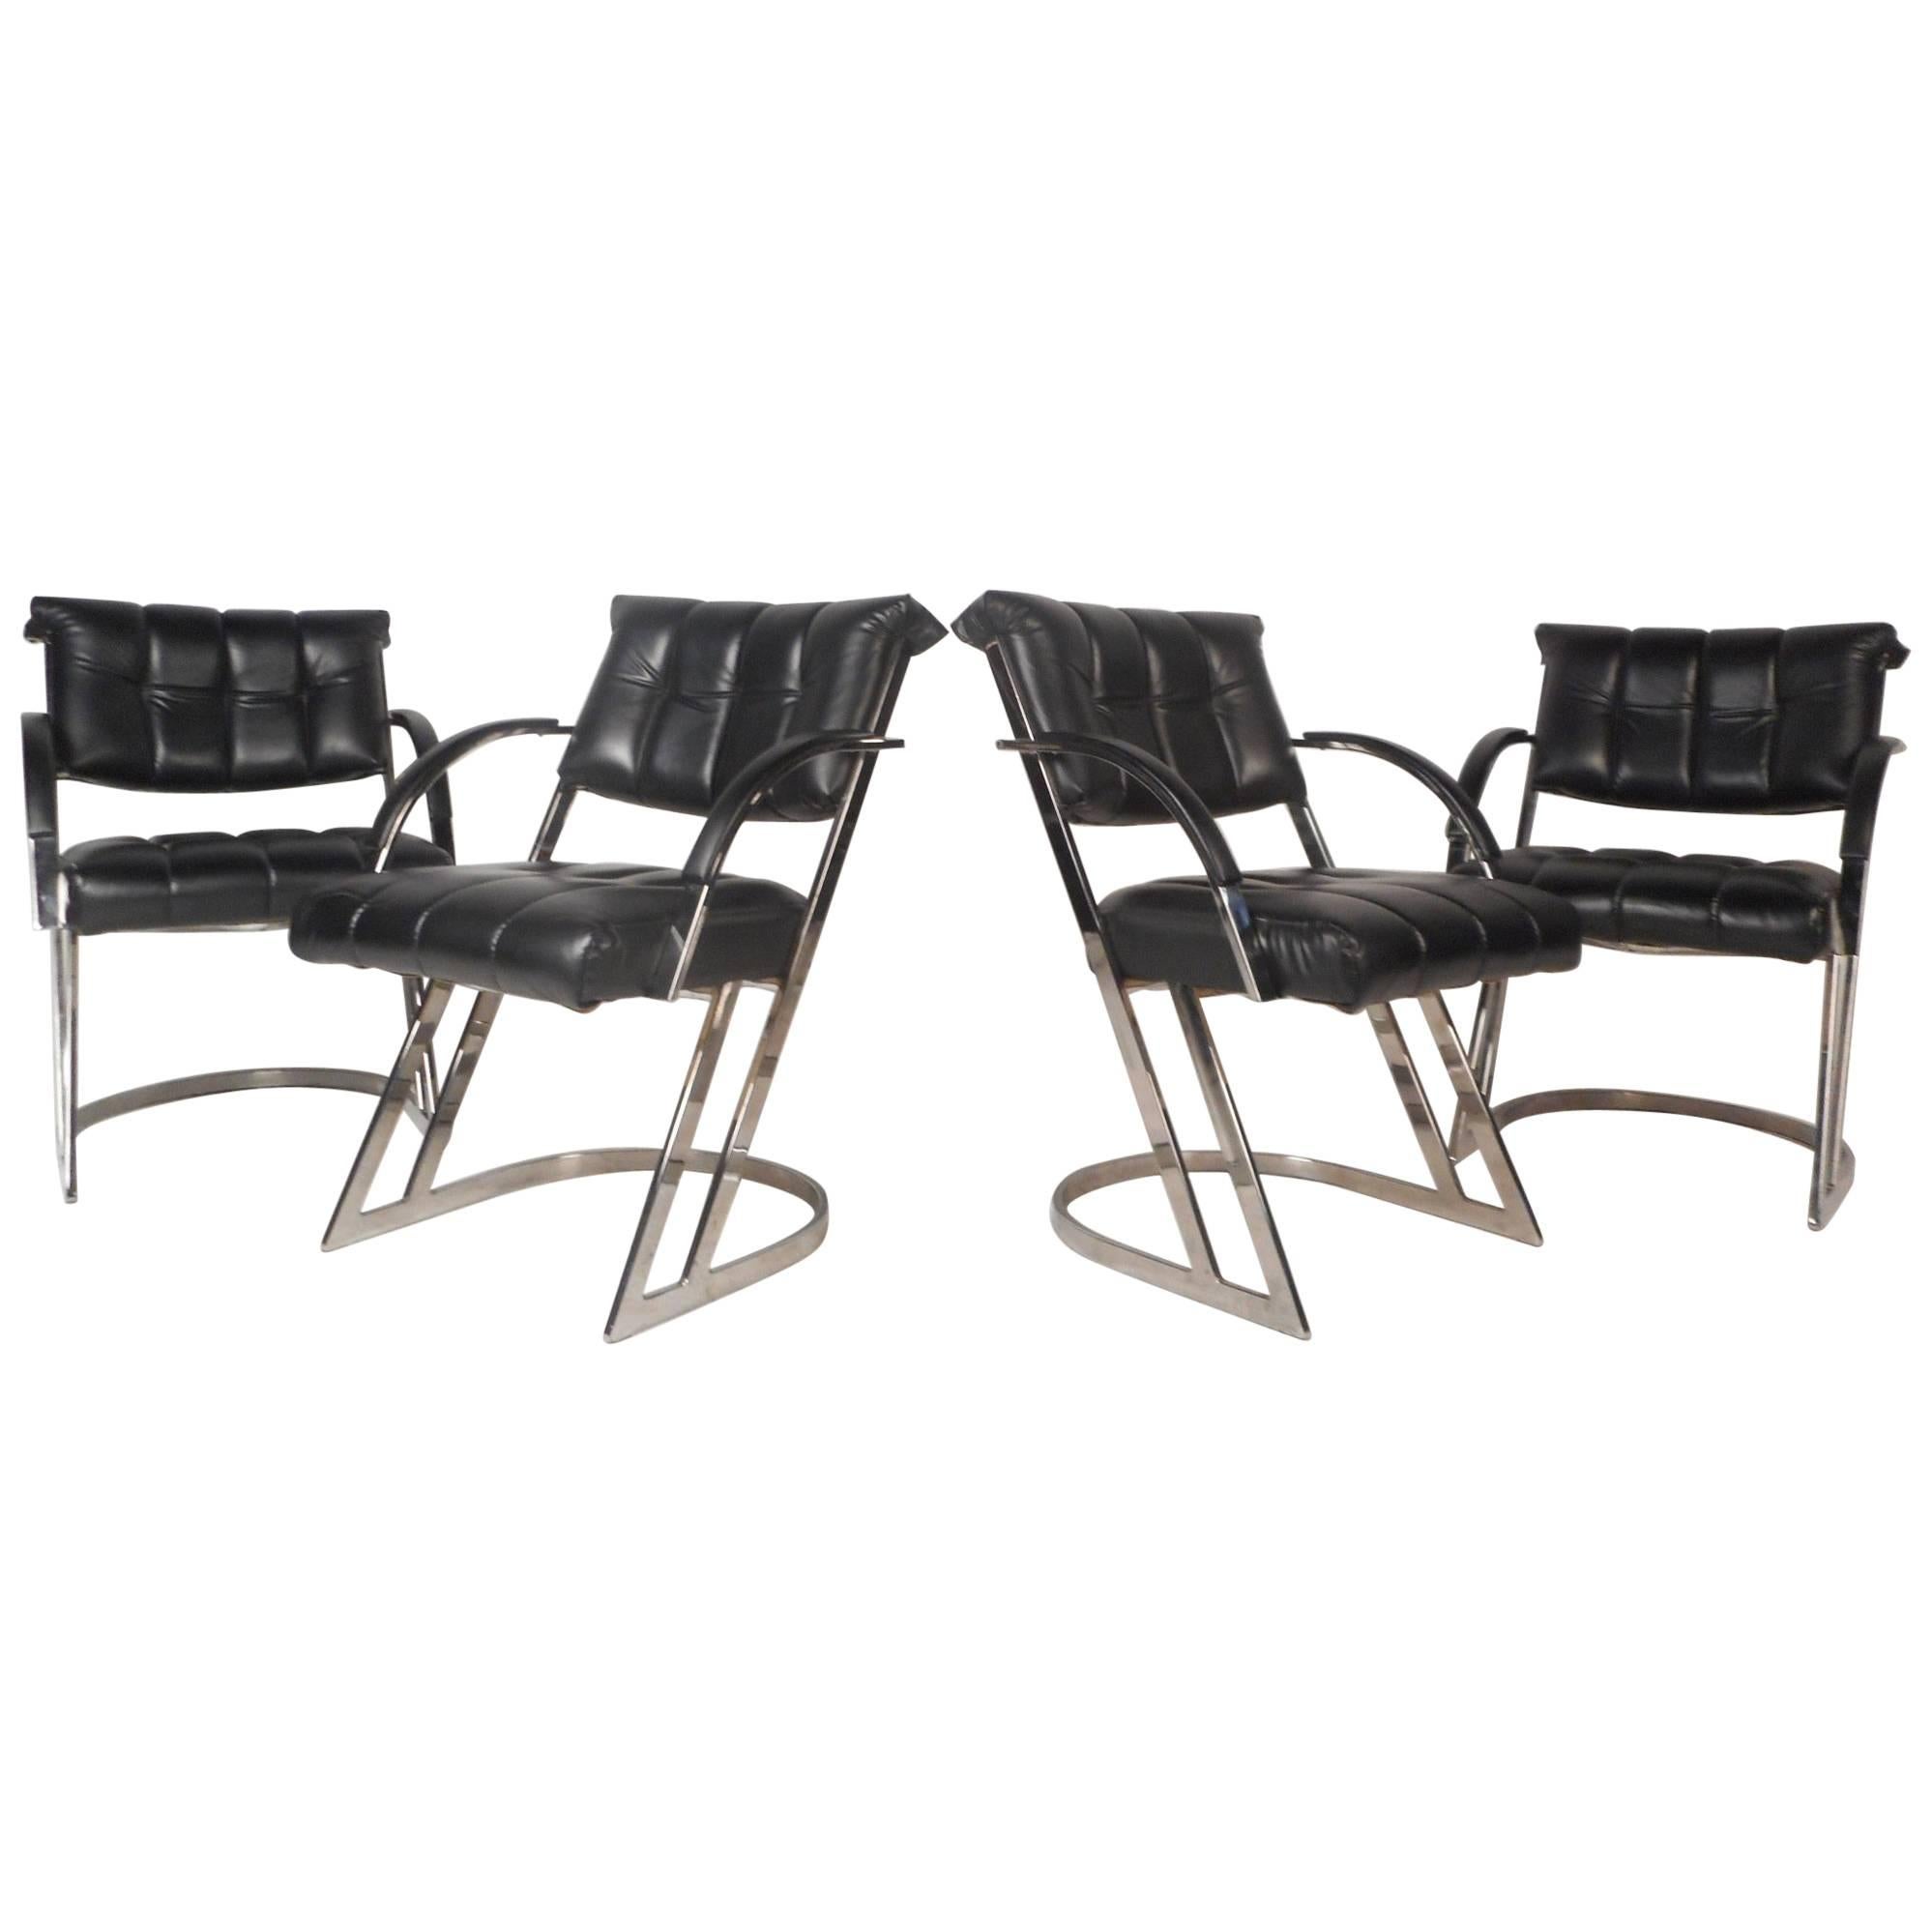 Set of Four Mid-Century Milo Baughman Style Cantilever Chairs For Sale